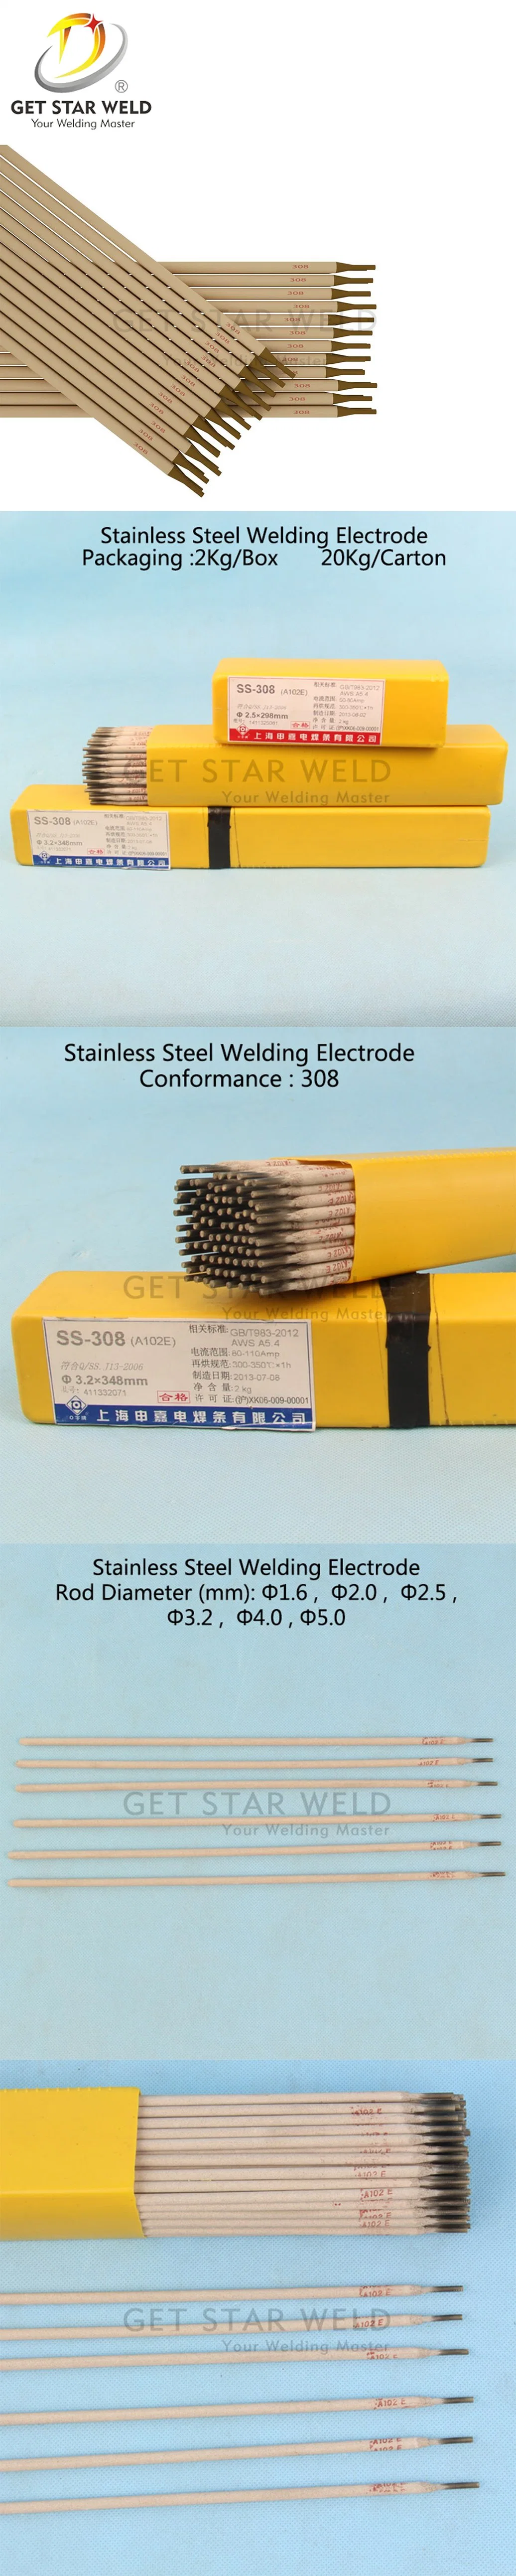 Get Star Weld Stainless Steel MMA Welding Rods Electrode Stainless Steel 308 / 316L for Wholesale